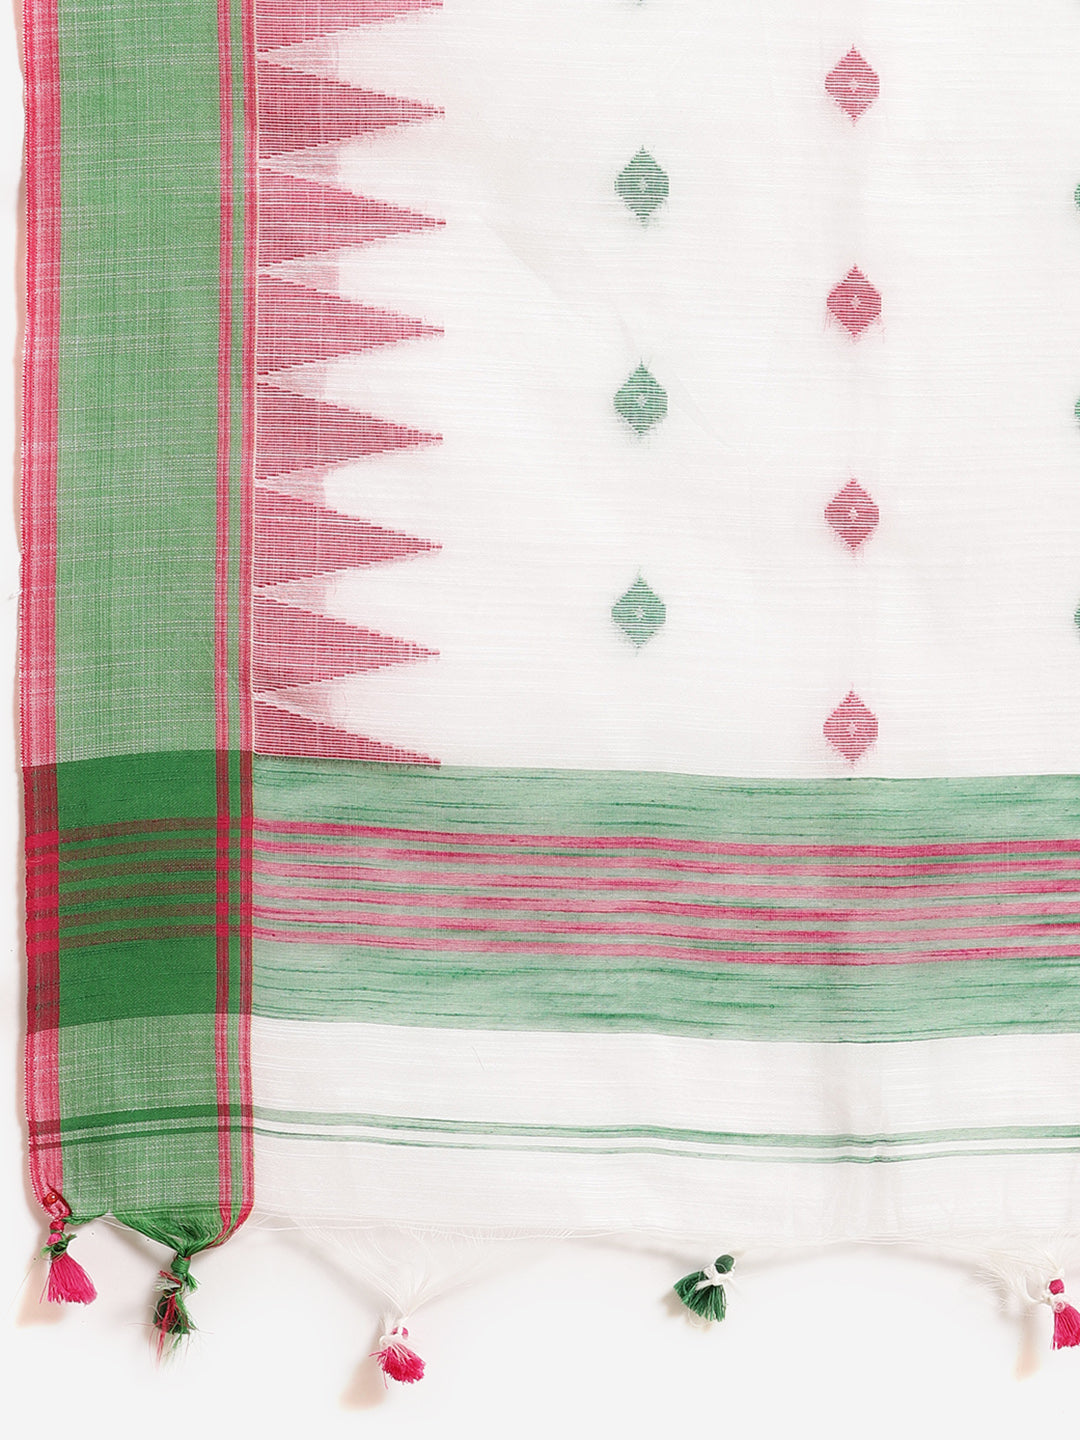 White and Green, Kalakari India Ikat Silk Cotton Woven Design Saree with Blouse SHBESA0044-Saree-Kalakari India-SHBESA0044-Bengal, Cotton, Geographical Indication, Hand Crafted, Heritage Prints, Ikkat, Natural Dyes, Red, Sarees, Sustainable Fabrics, Woven, Yellow-[Linen,Ethnic,wear,Fashionista,Handloom,Handicraft,Indigo,blockprint,block,print,Cotton,Chanderi,Blue, latest,classy,party,bollywood,trendy,summer,style,traditional,formal,elegant,unique,style,hand,block,print, dabu,booti,gift,present,g